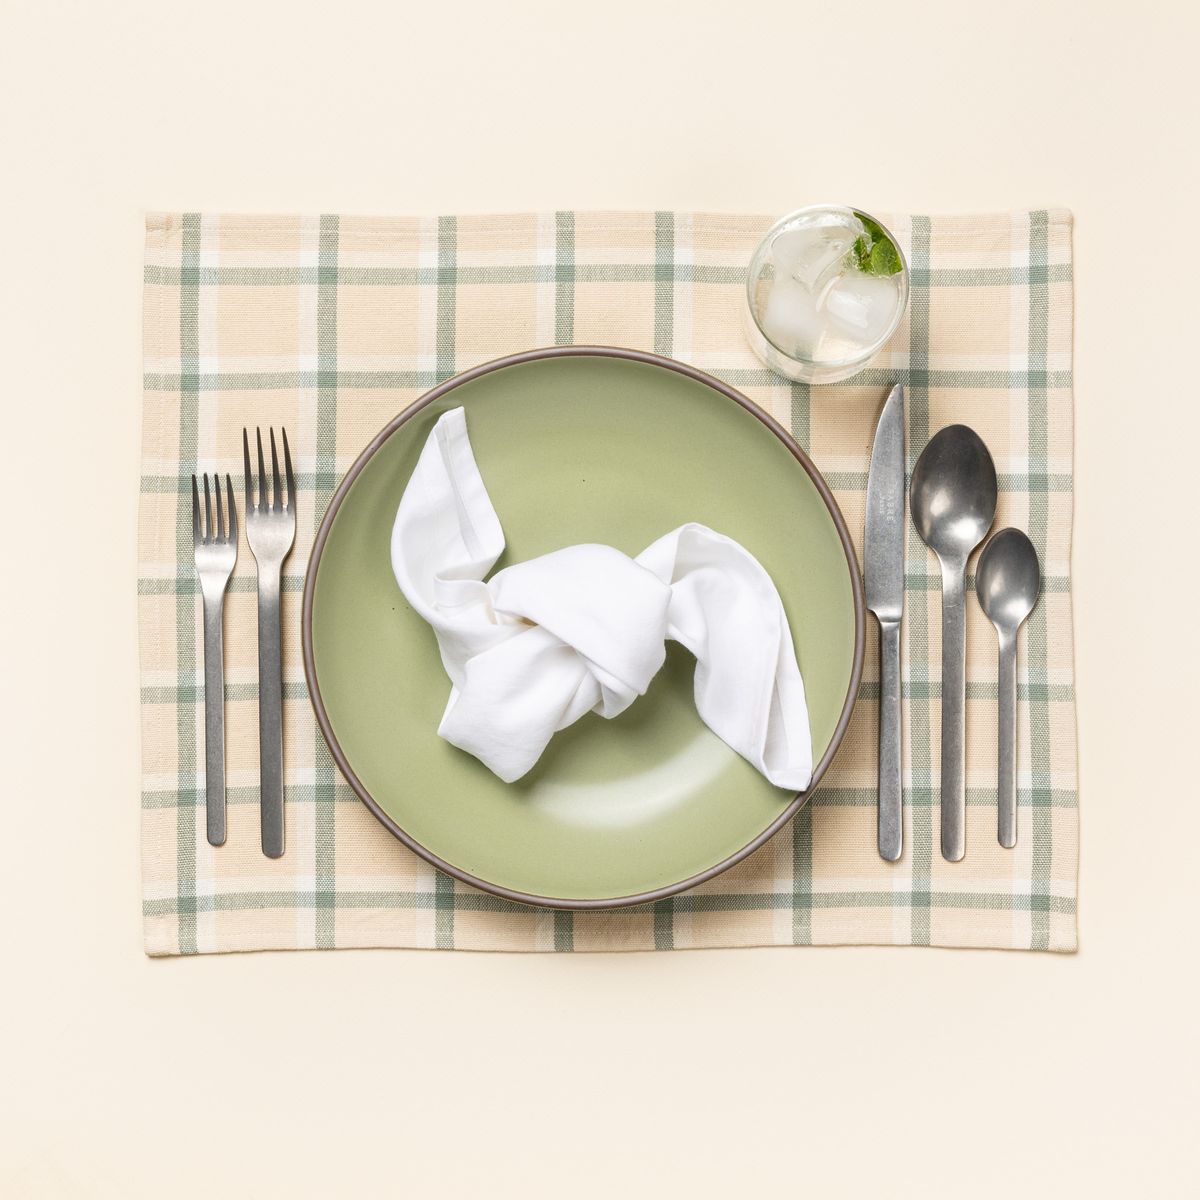 A table setting with a A gingham rectangular placemat in cream, off-white, and sage green colors, sage green plate, vintage steel flatware, and a folded white napkin